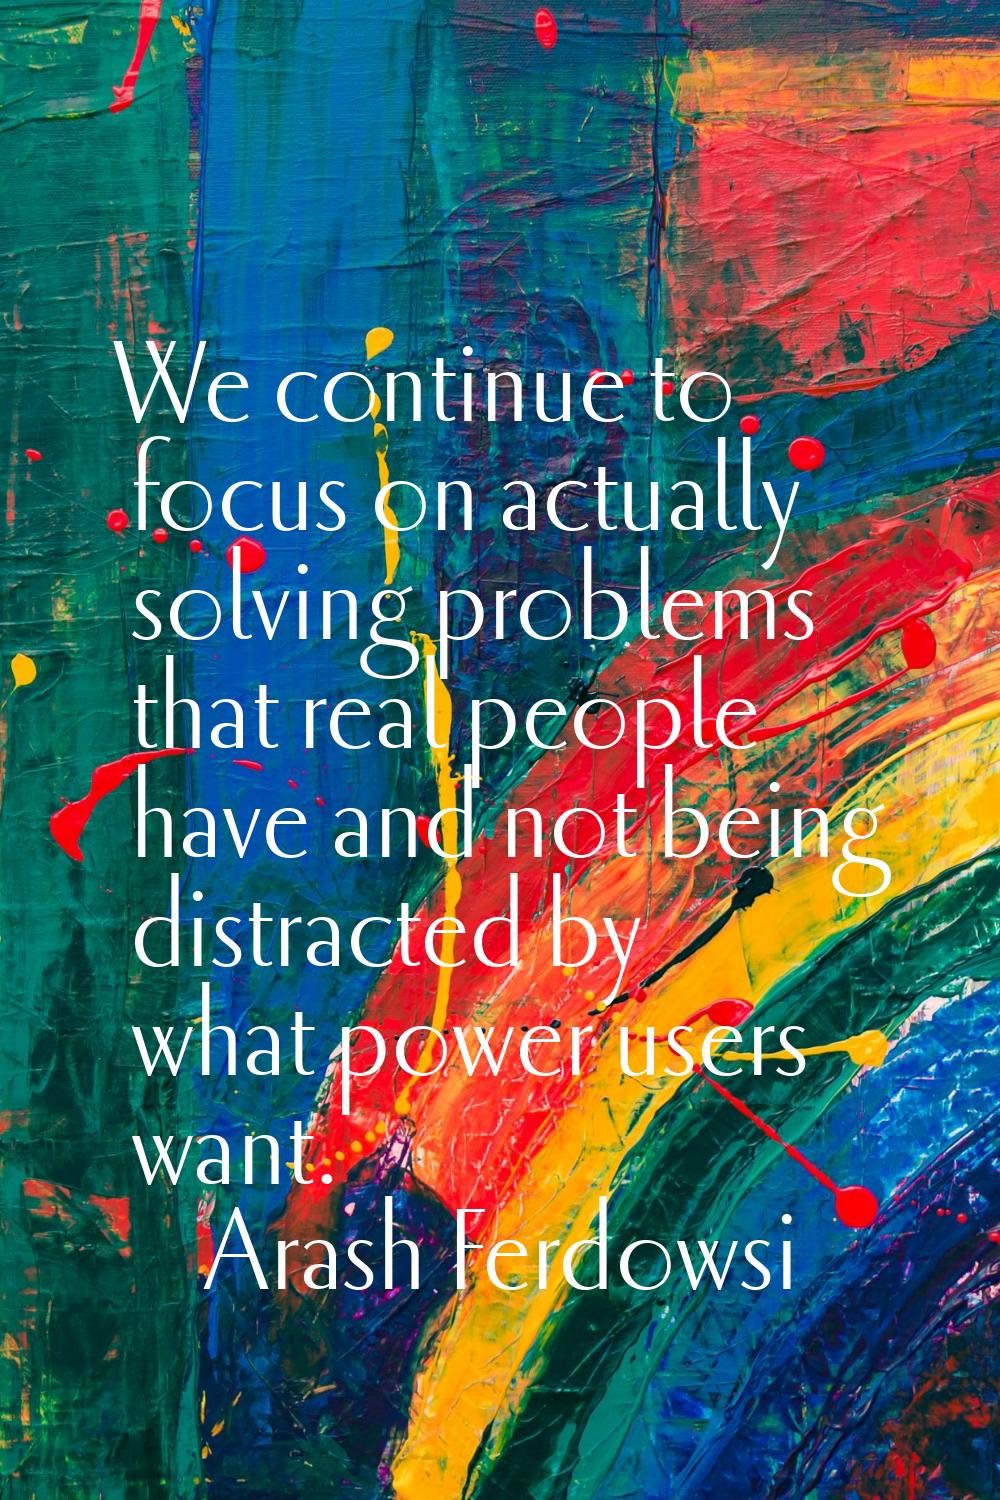 We continue to focus on actually solving problems that real people have and not being distracted by